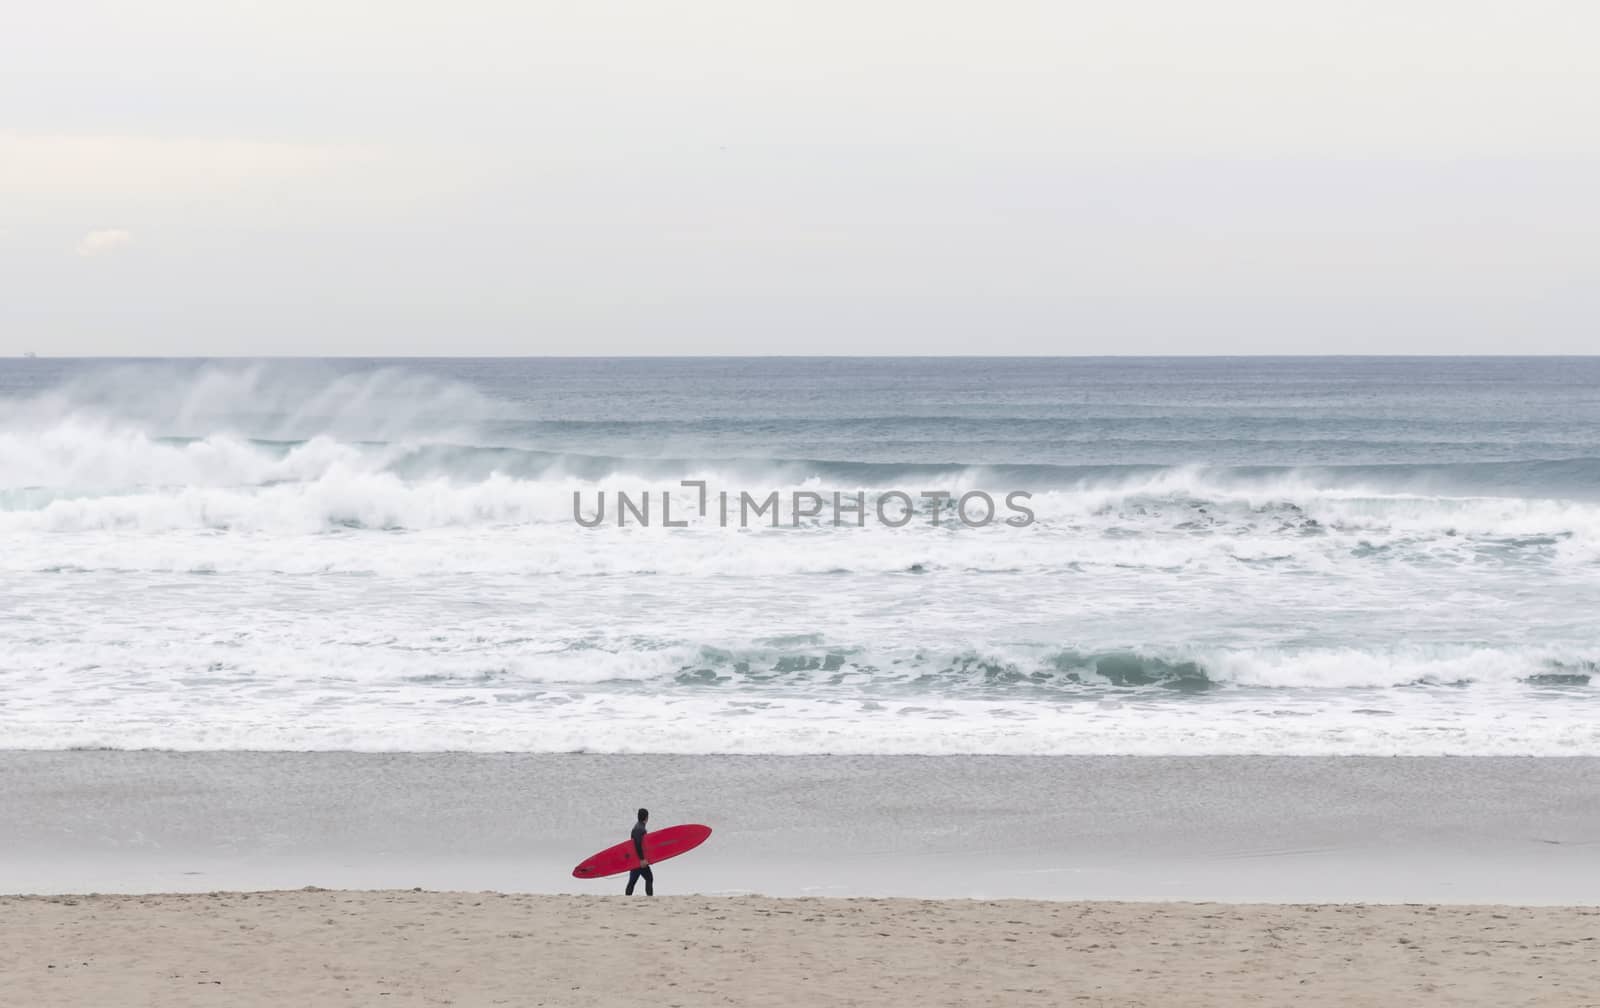 Red board surfer walking on the beach with waves in the background